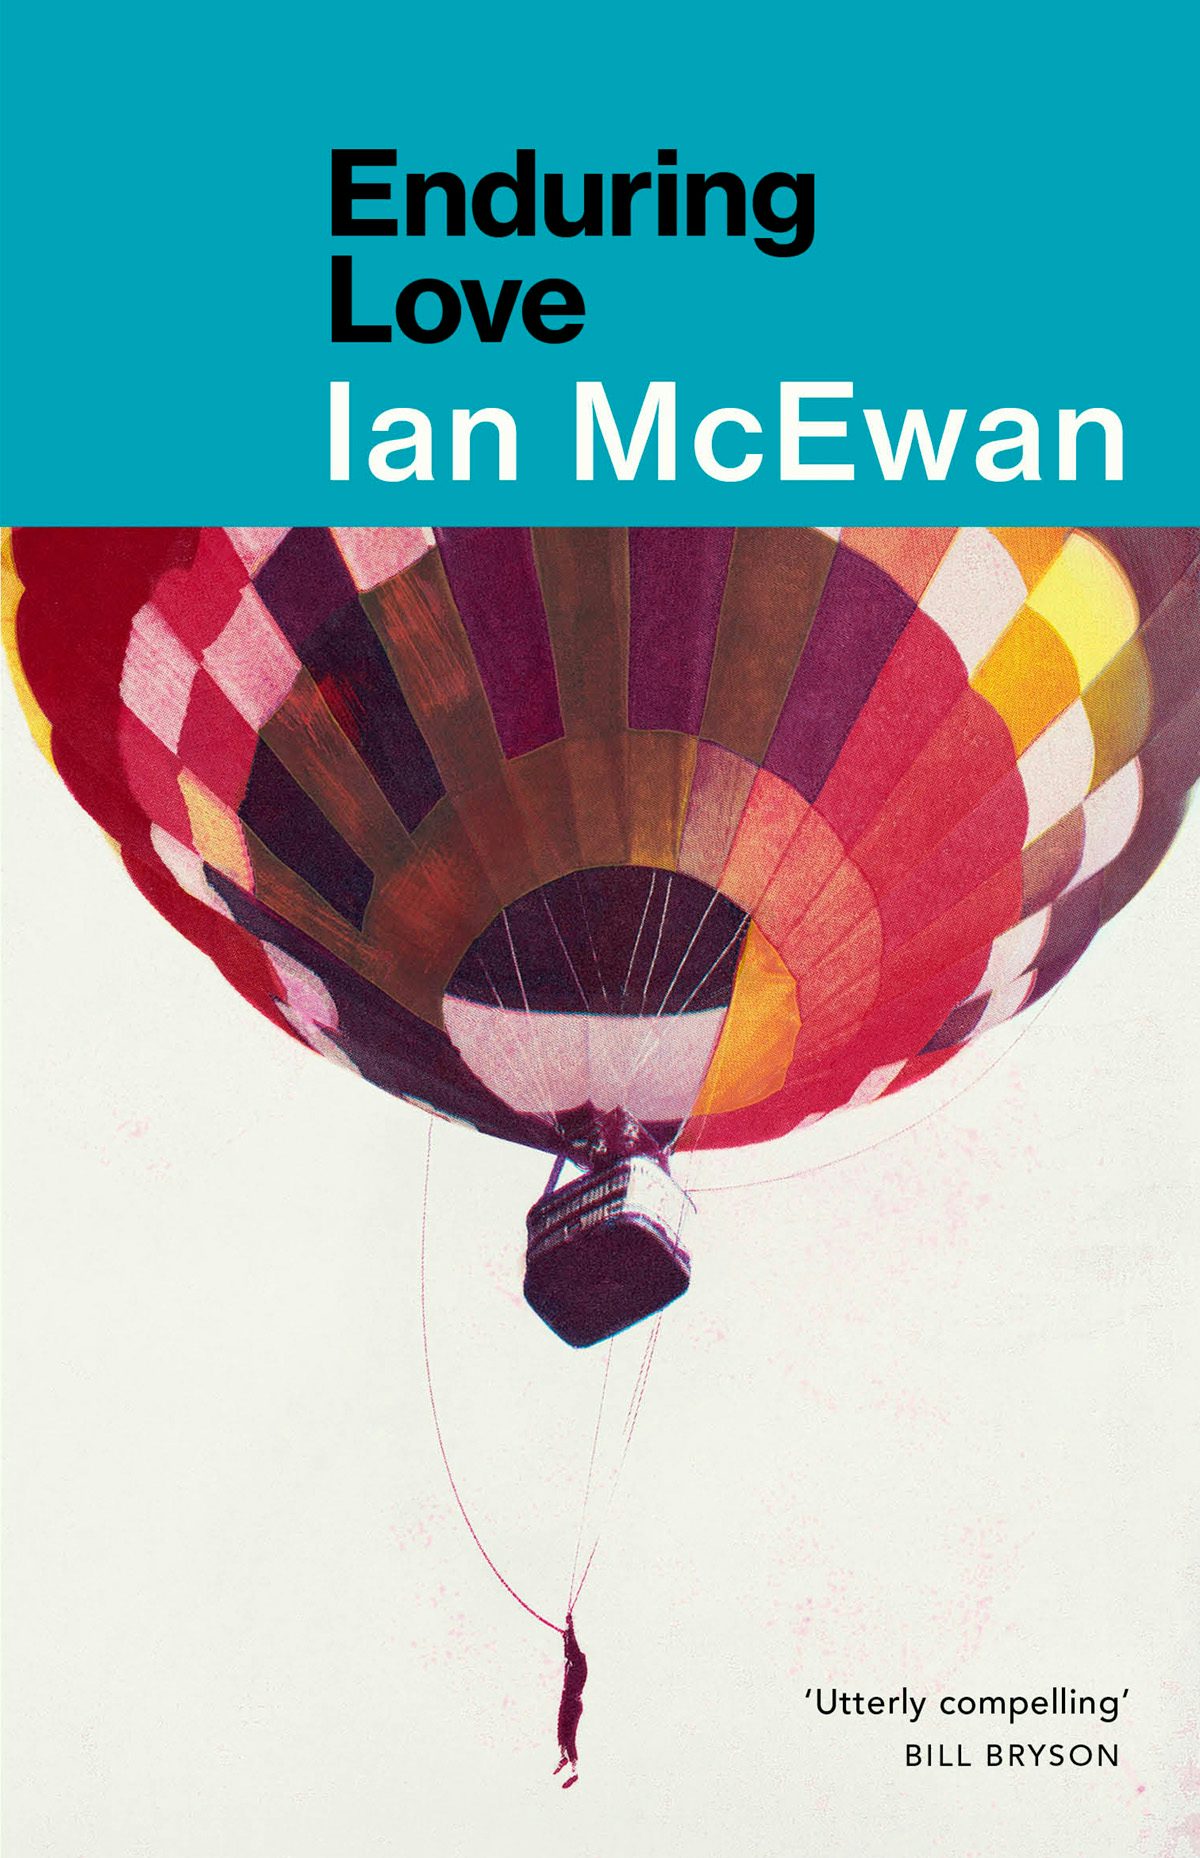 Cover of Enduring Love by Ian McEwan showing a cut out graphic of pink, yellow and purple hot air balloon with a person suspended beneath